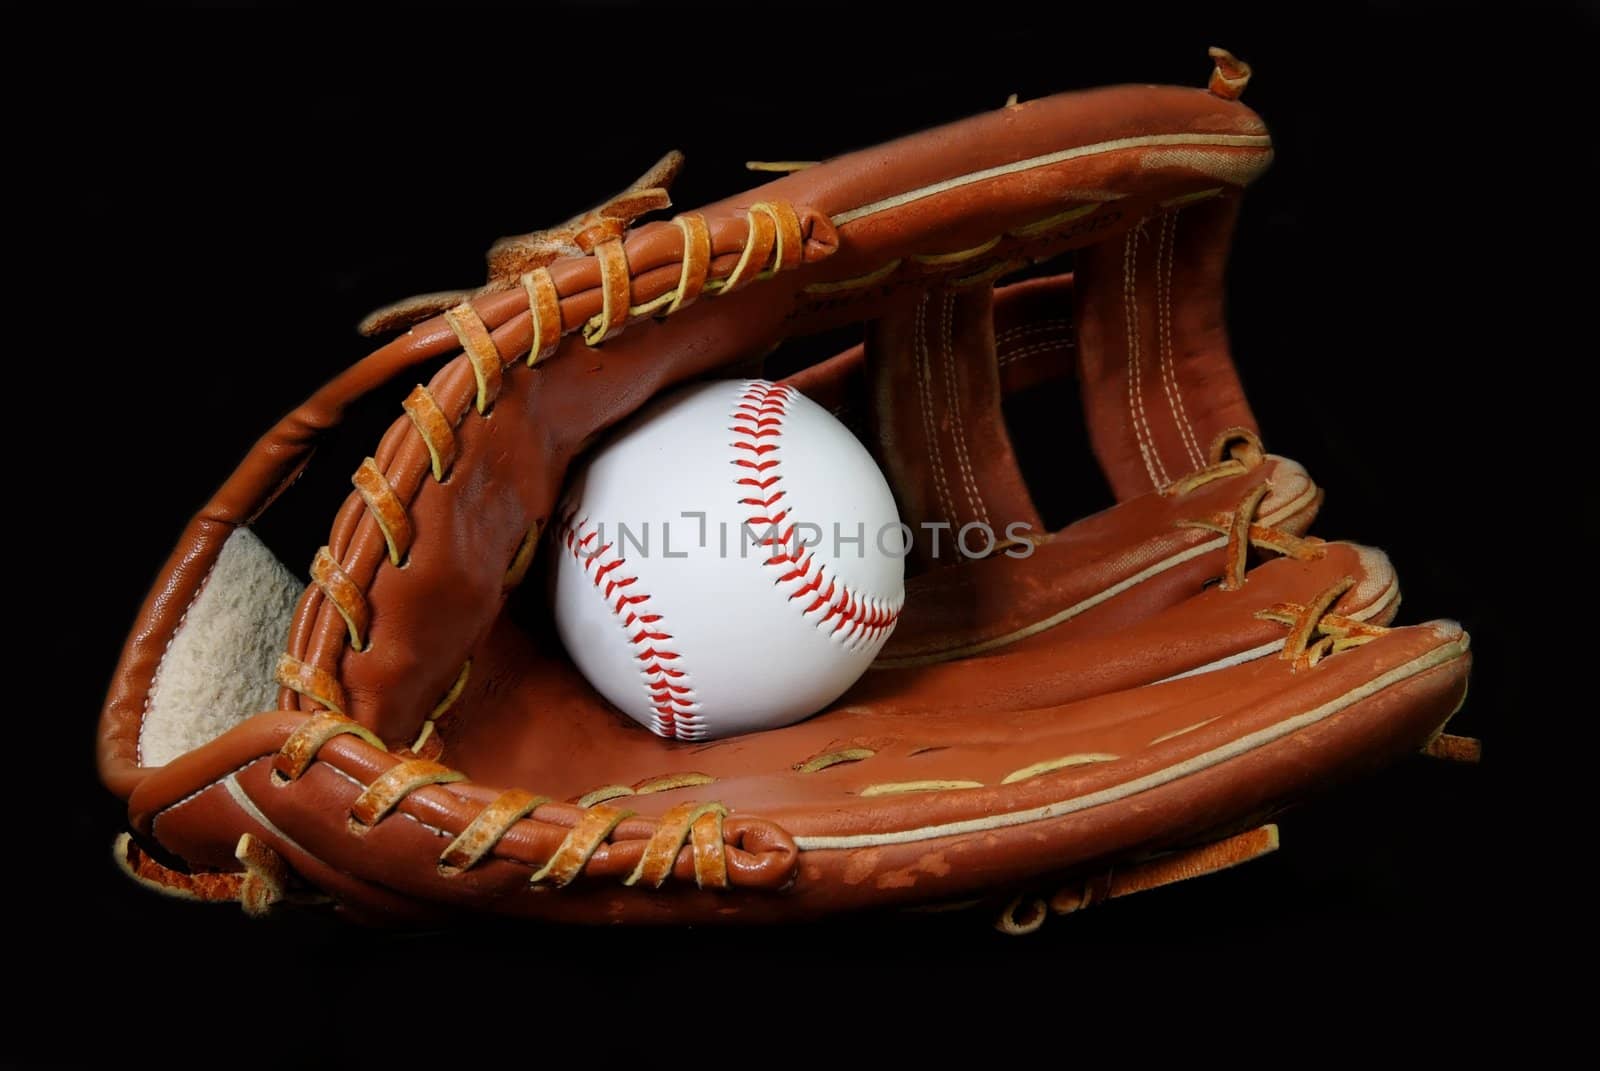 Baseball in glove isolated on black background.